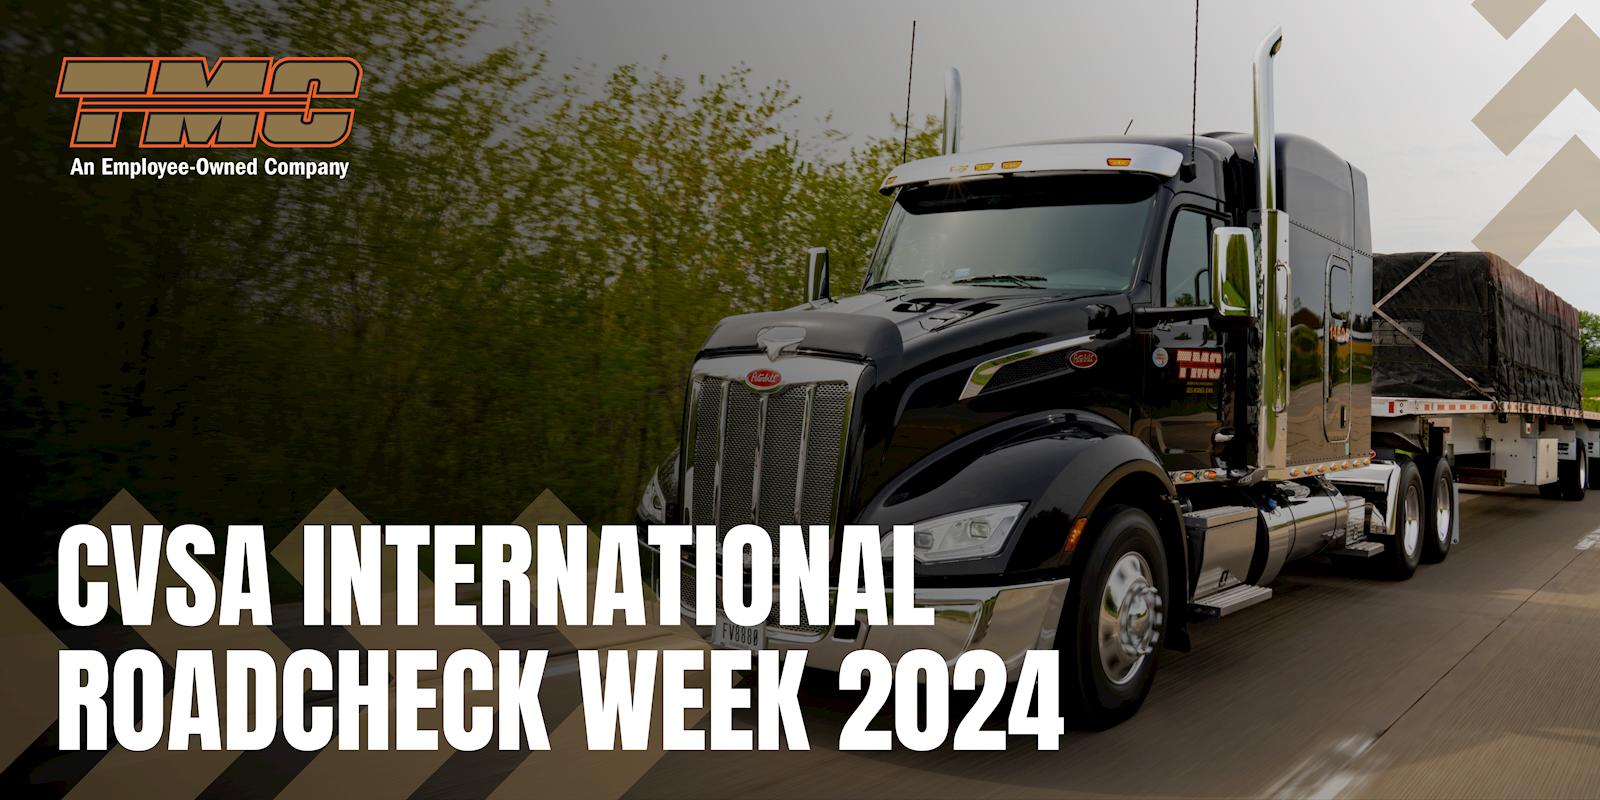 What You Need to Know About International Roadcheck 2024